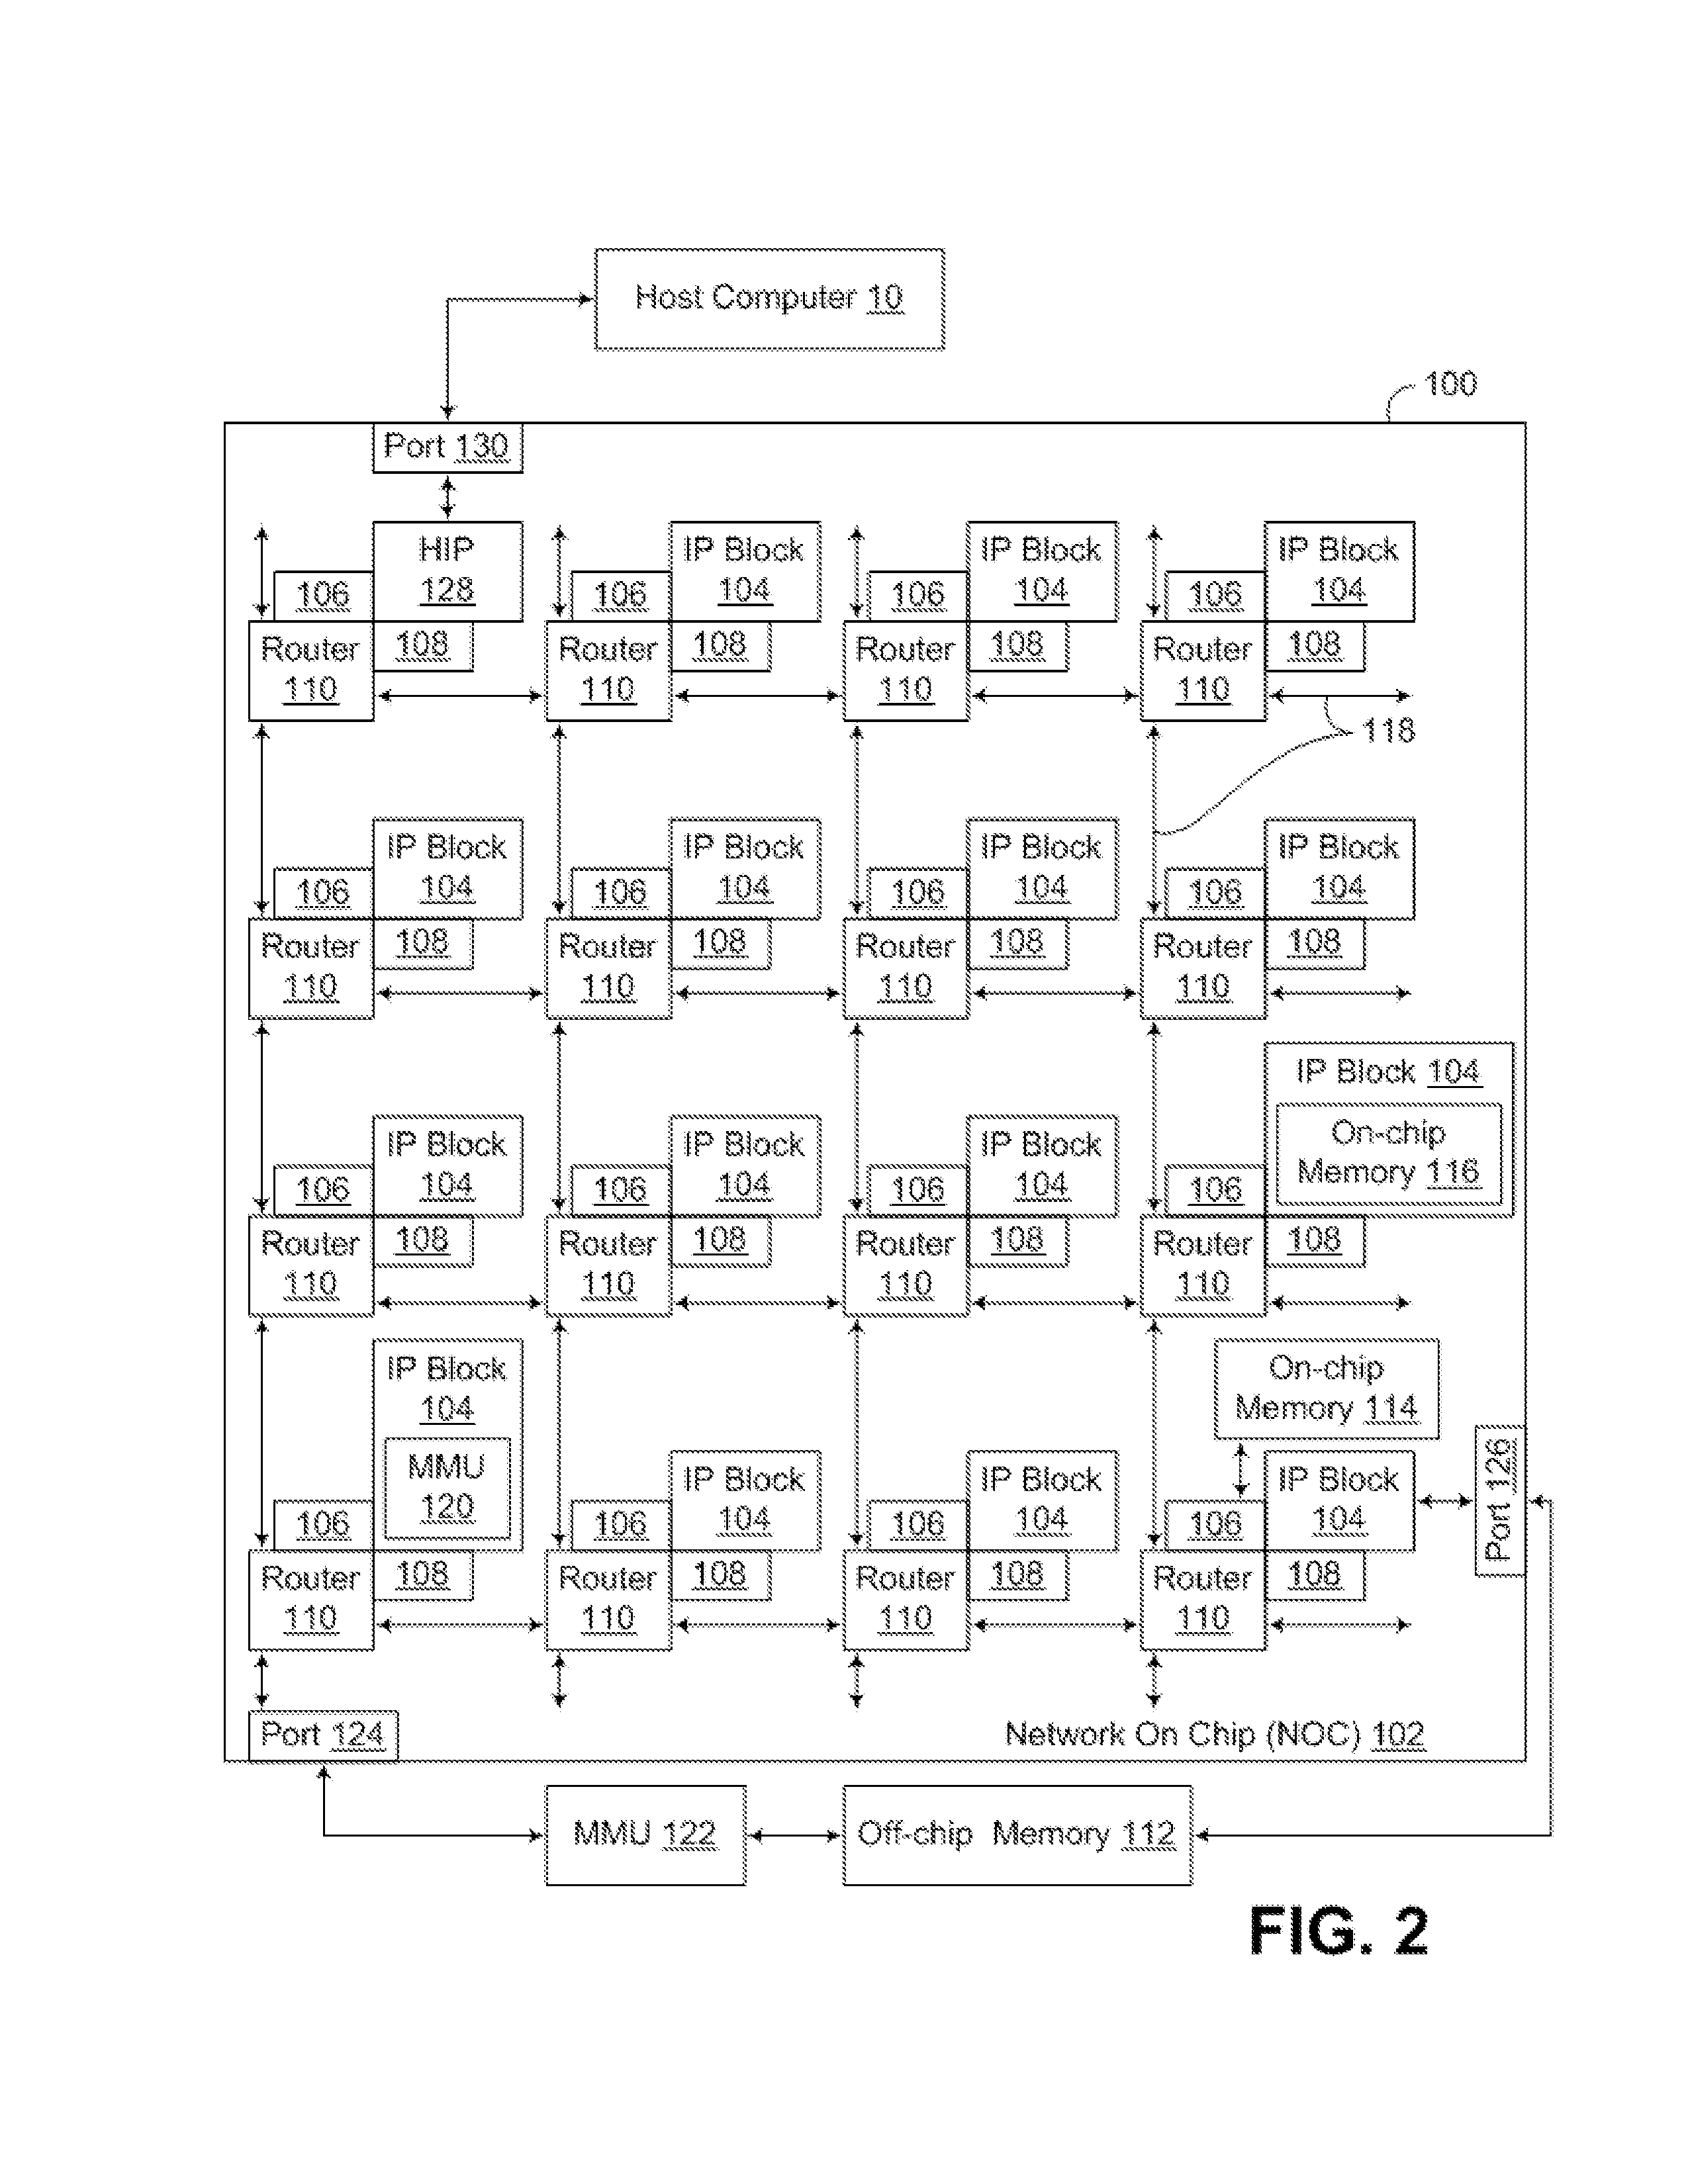 External auxiliary execution unit interface to off-chip auxiliary execution unit